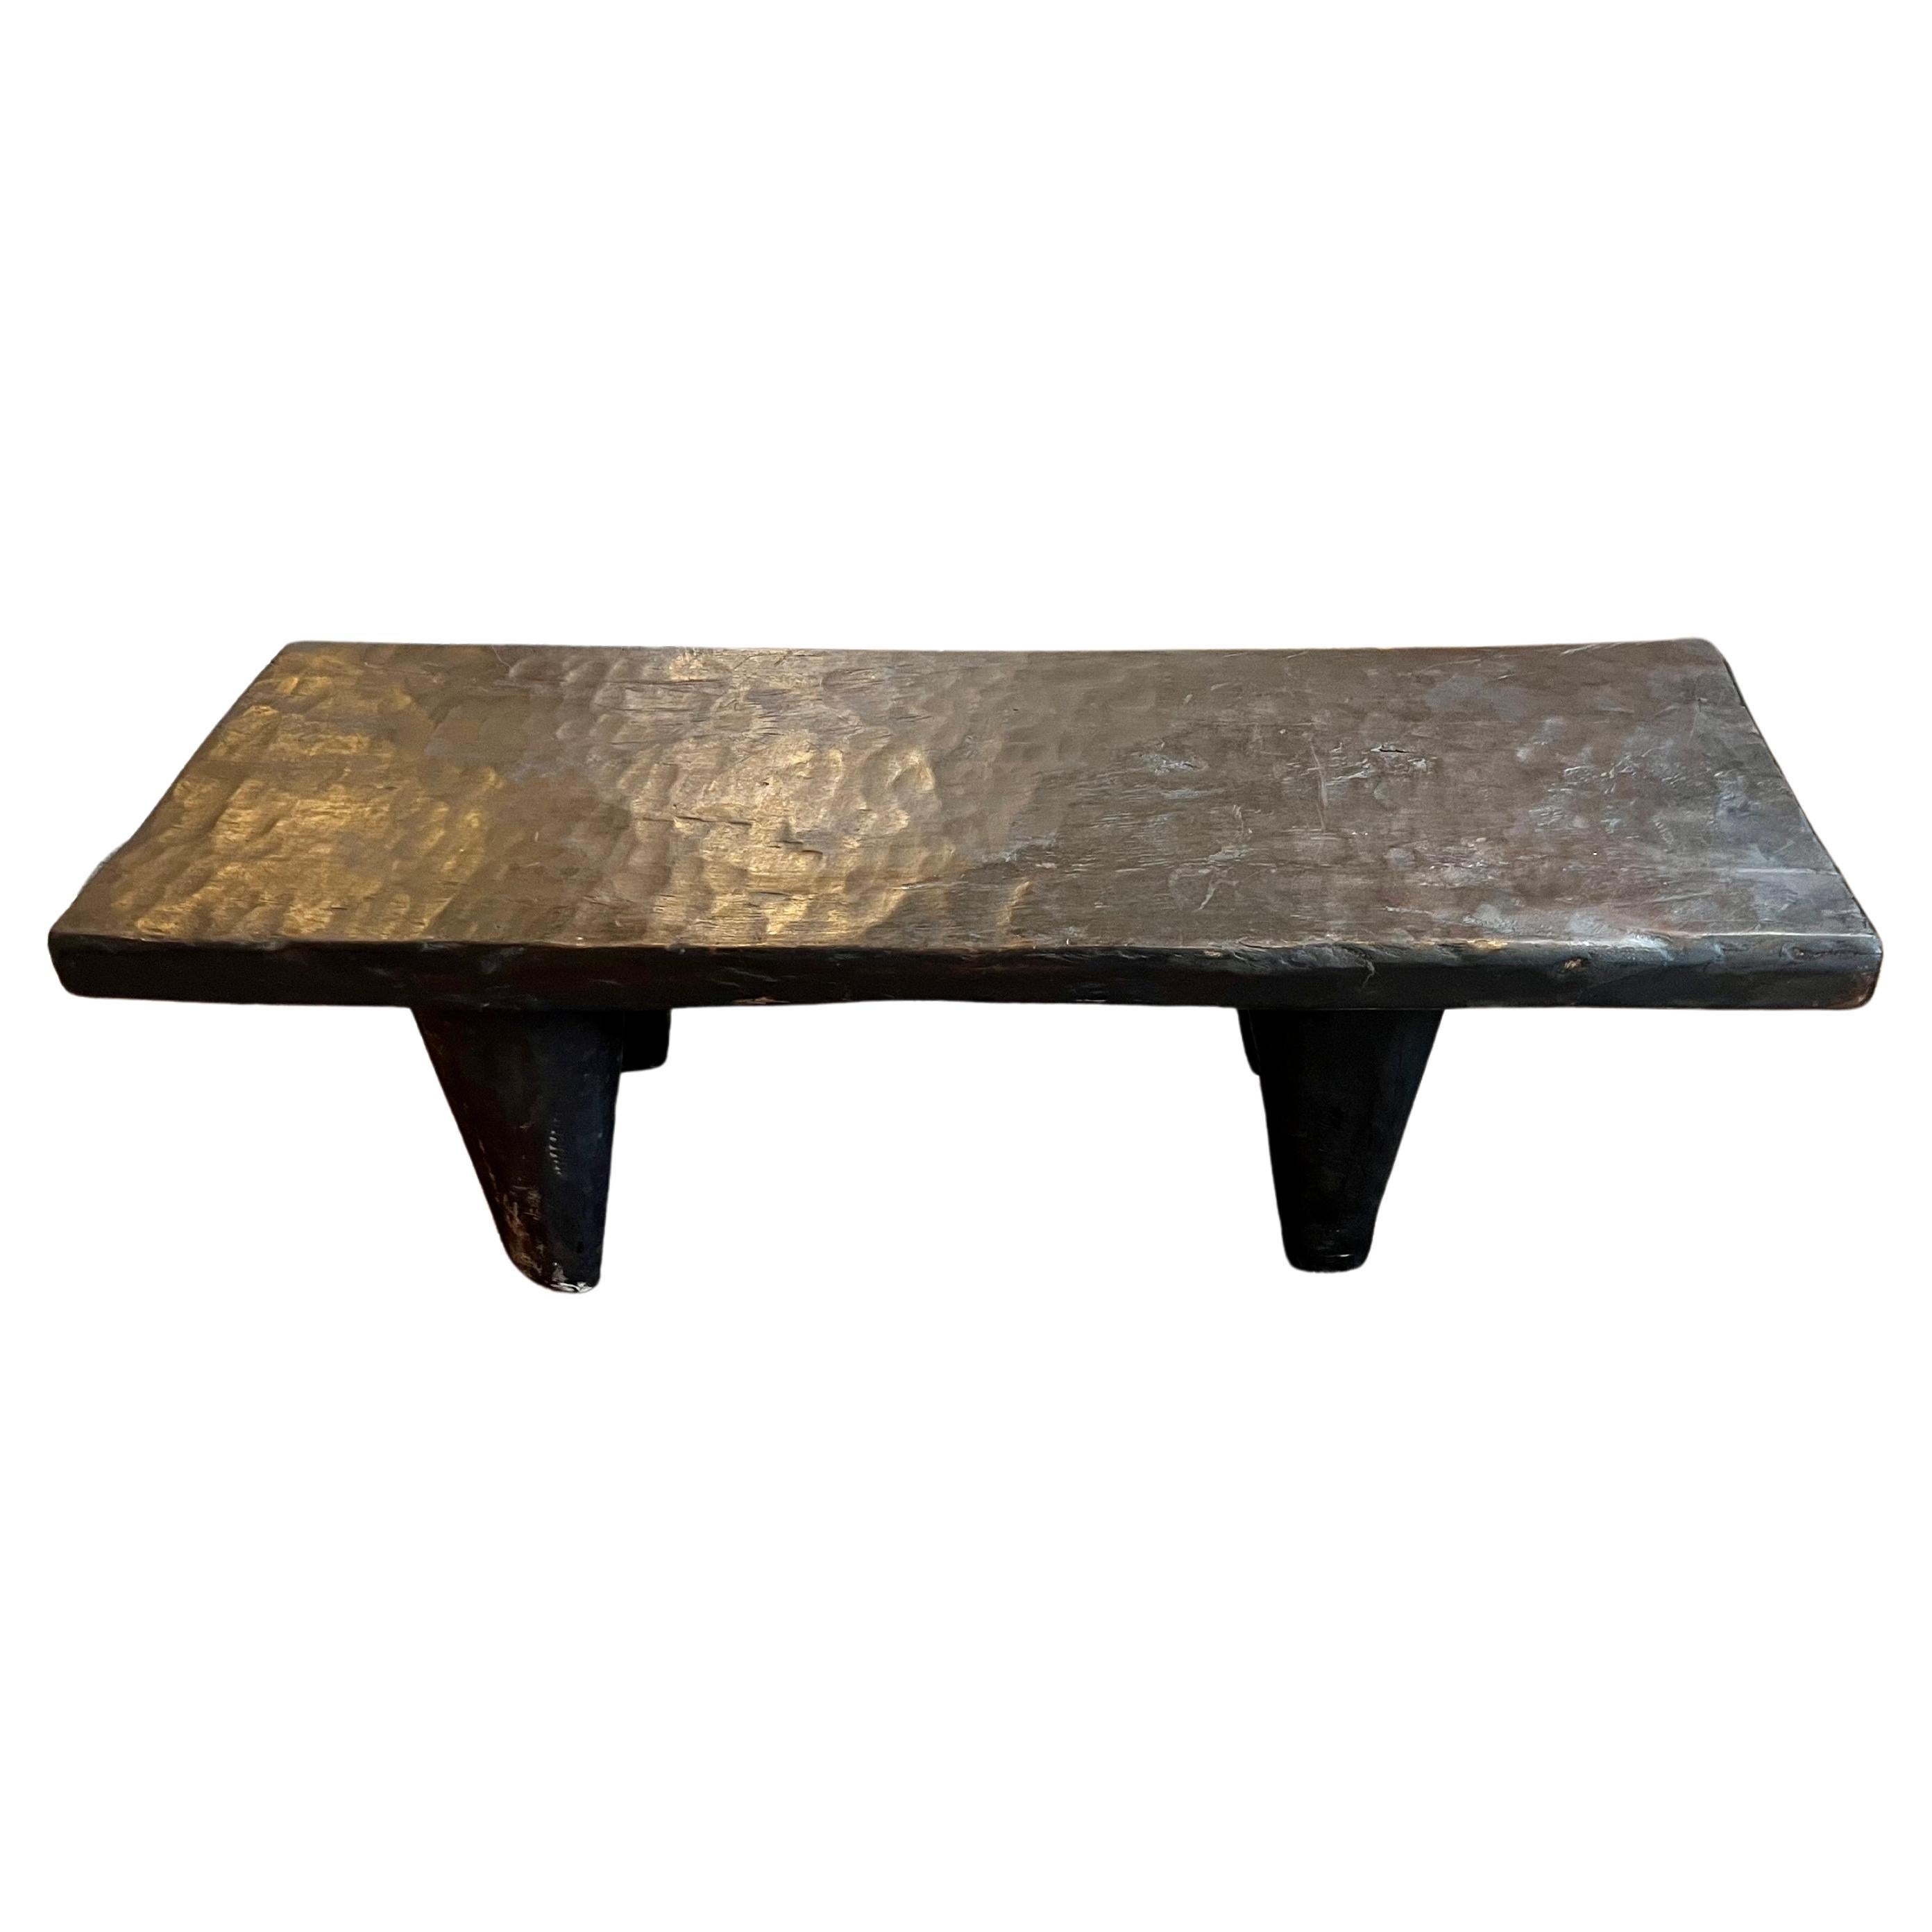 Hand Carved Wood Low Table or Bench from the Ivory Coast